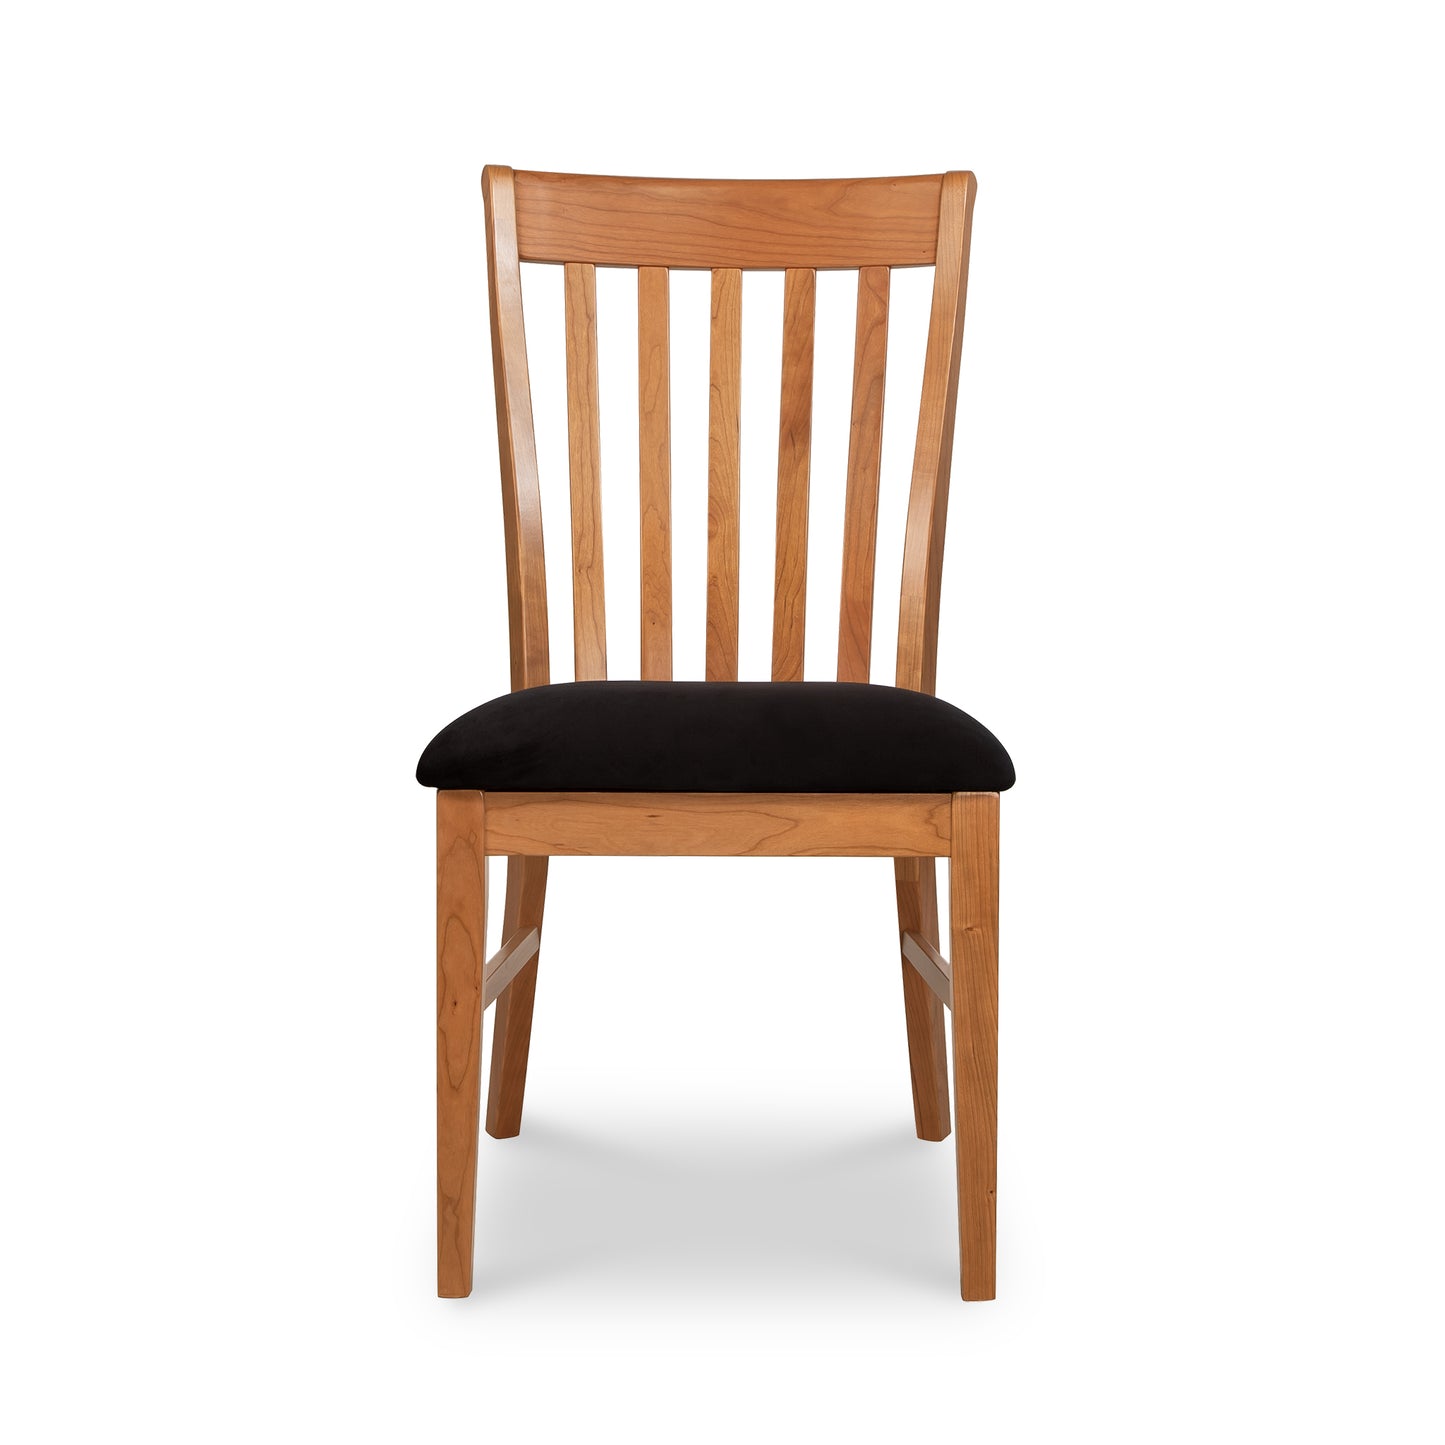 A Vermont Woods Studios Country Shaker Chair with a slatted back and a black upholstered seat cushion, isolated on a white background.